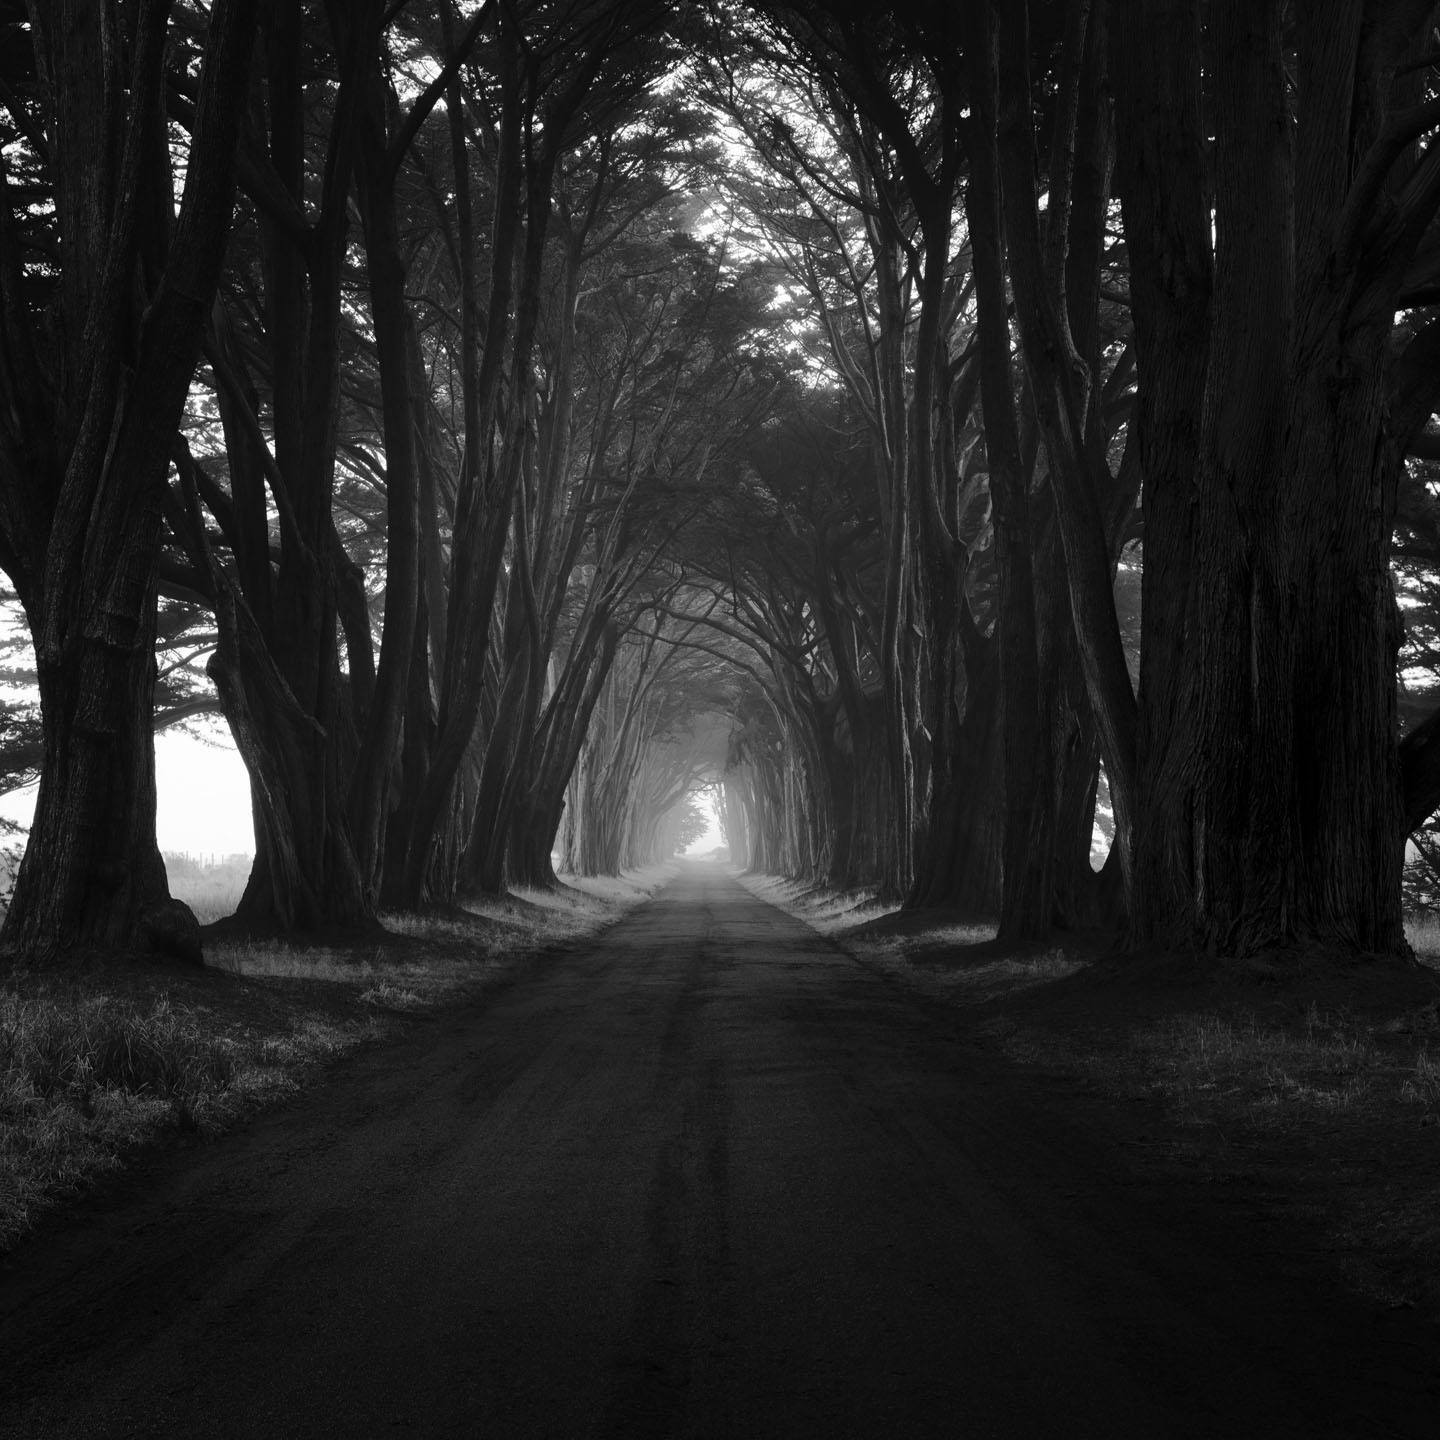 Black and white image of a tunnel formed by cypress trees